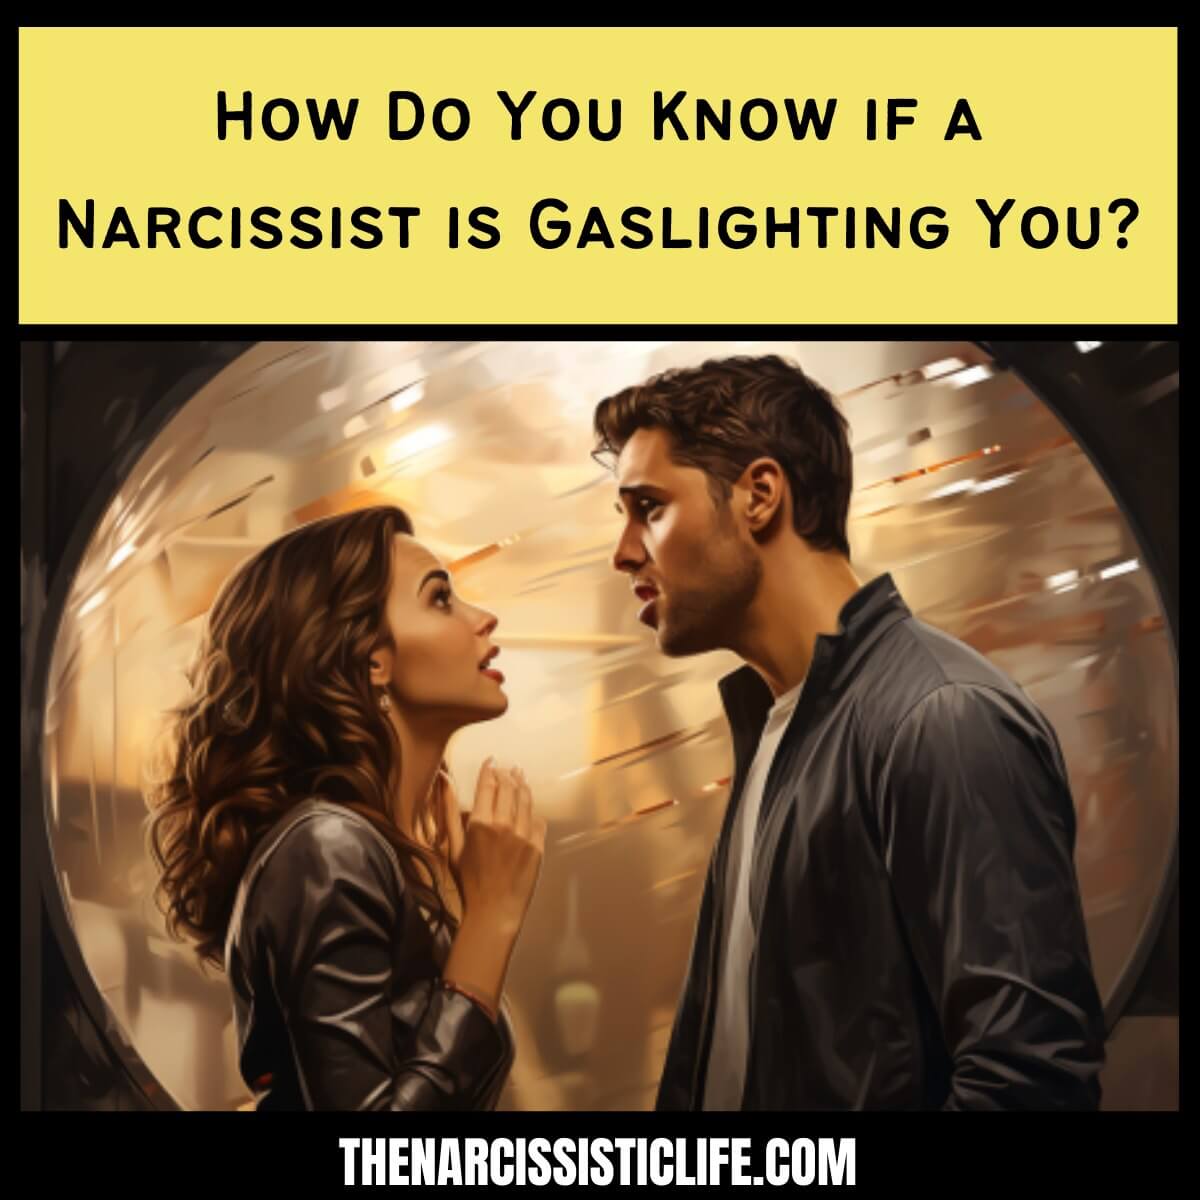 How Do You Know if a Narcissist is Gaslighting You